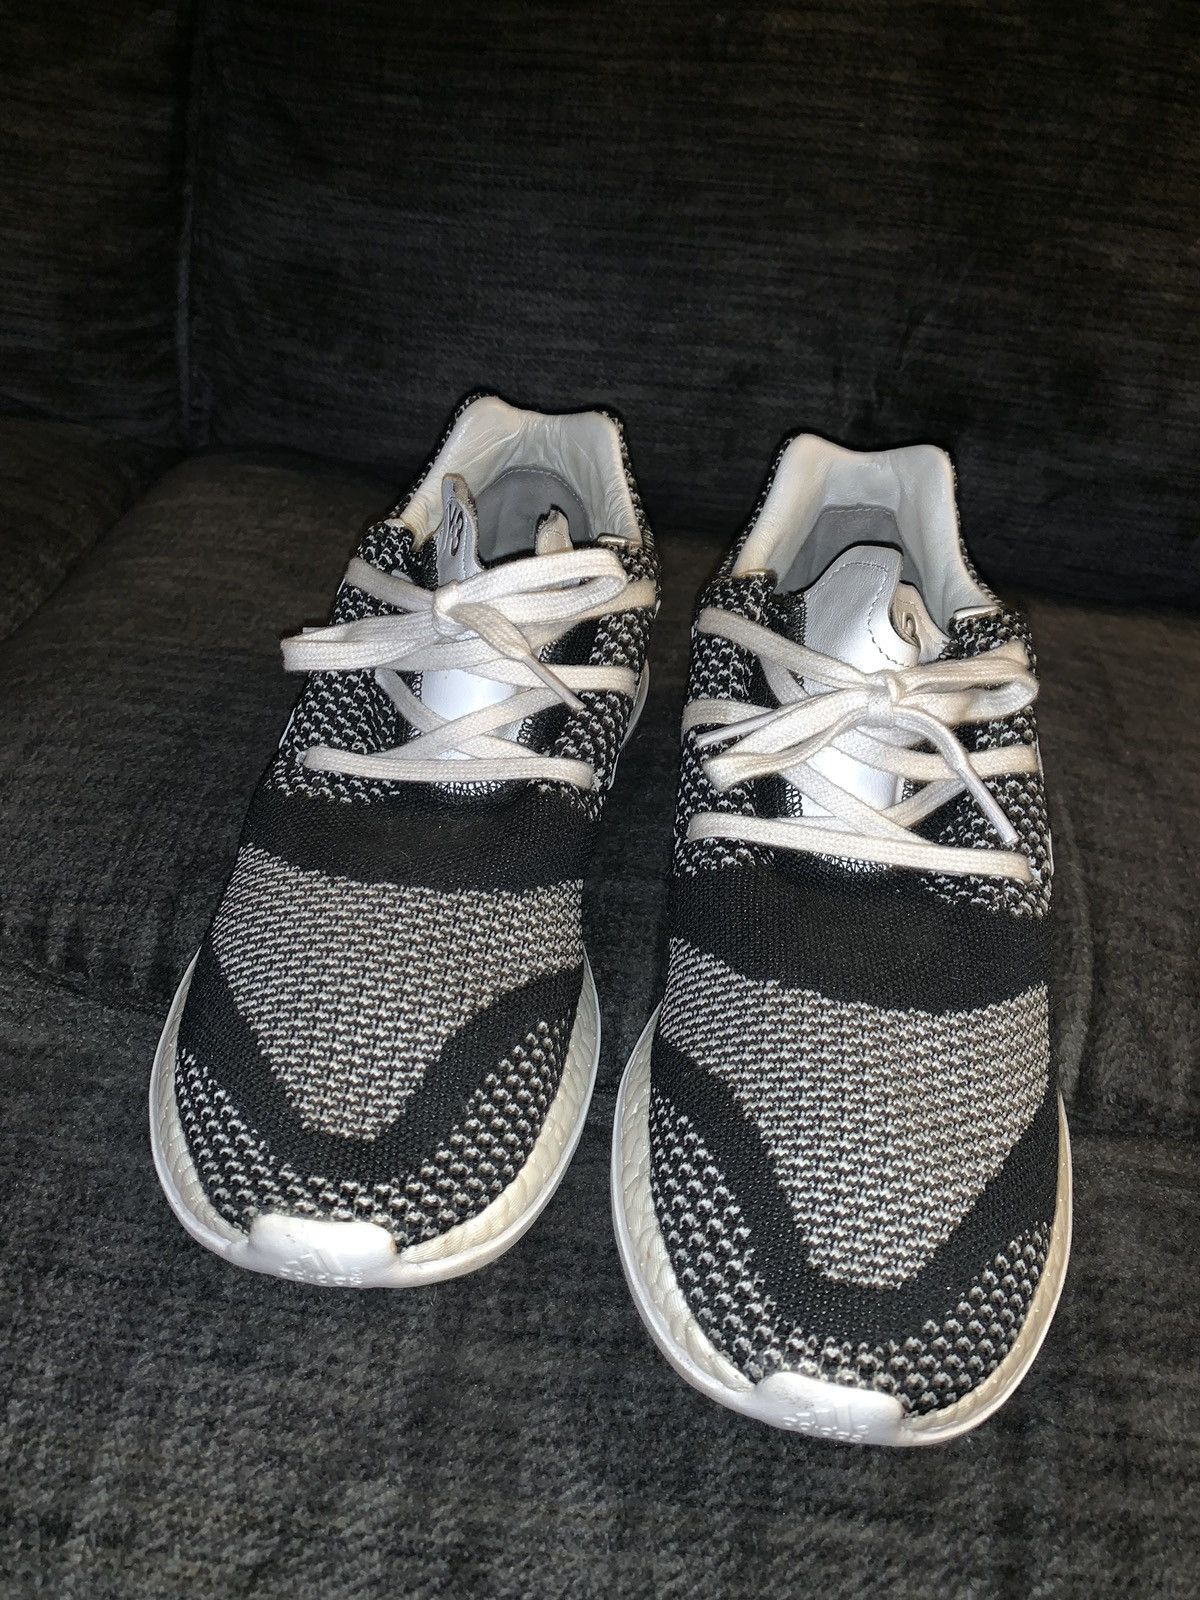 Y 3 Pure Boost Zg Knit | Grailed